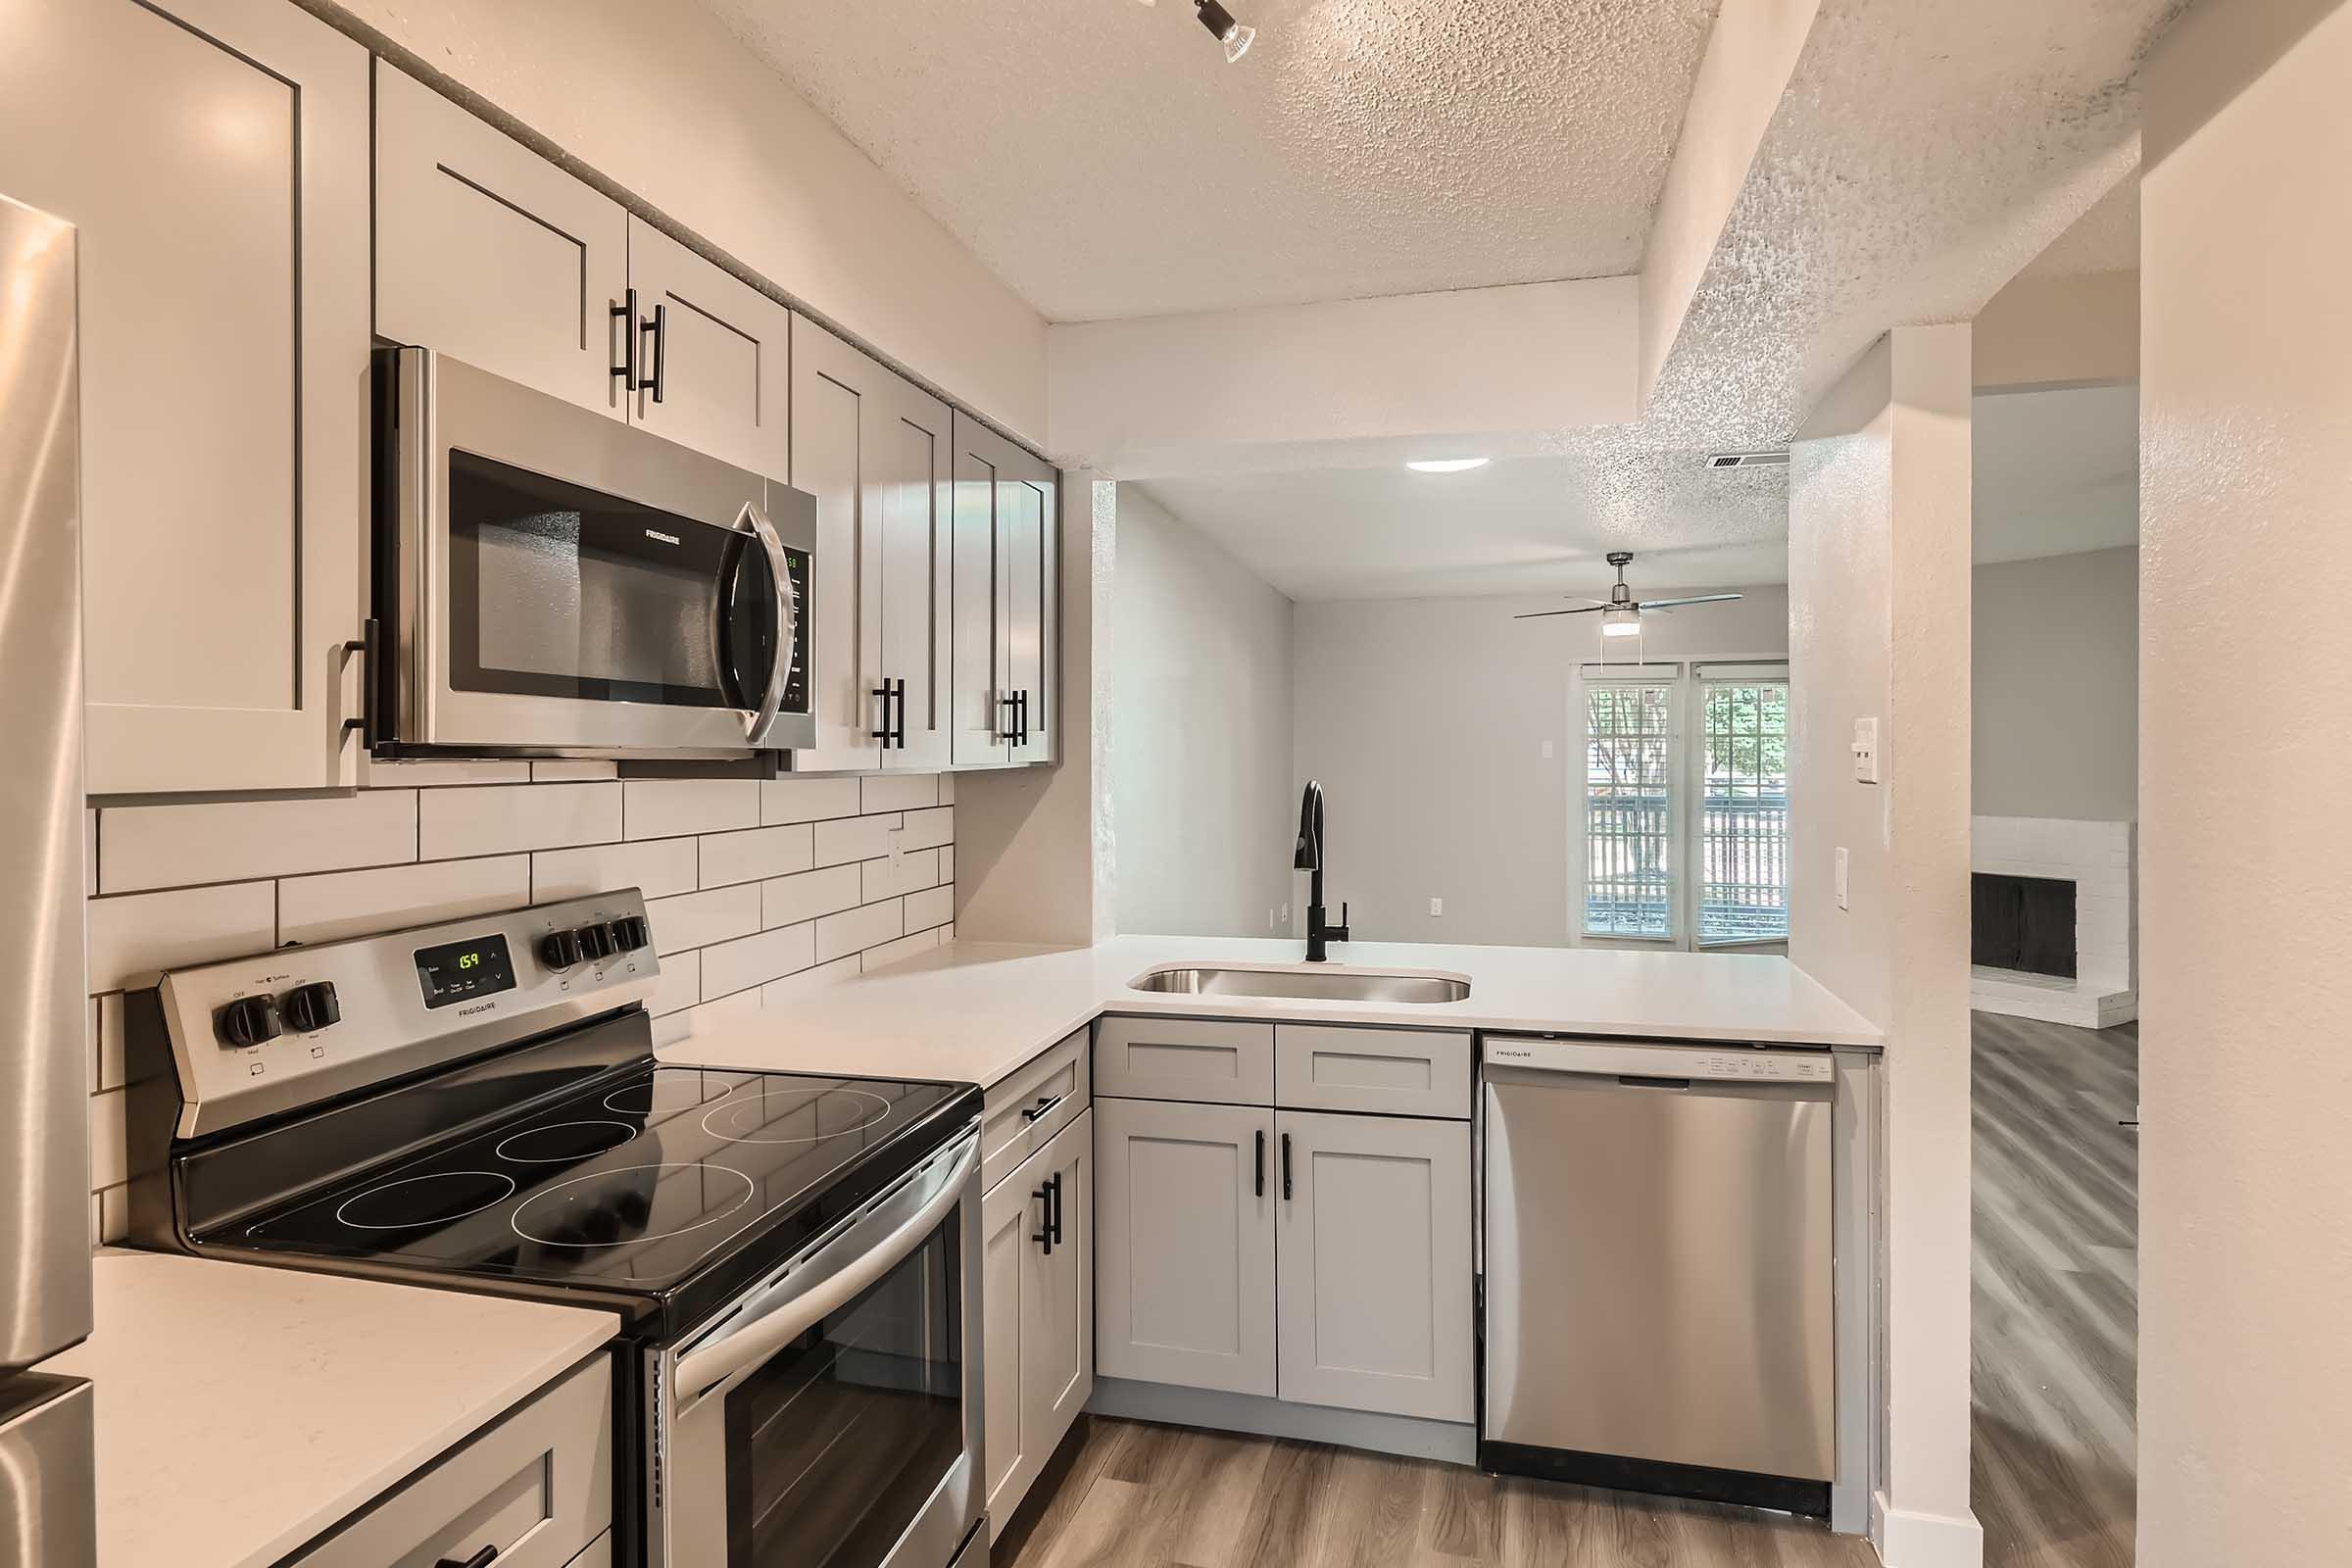 An apartment kitchen with grey shaker cabinets and stainless steel appliances at Rise North Arlington.